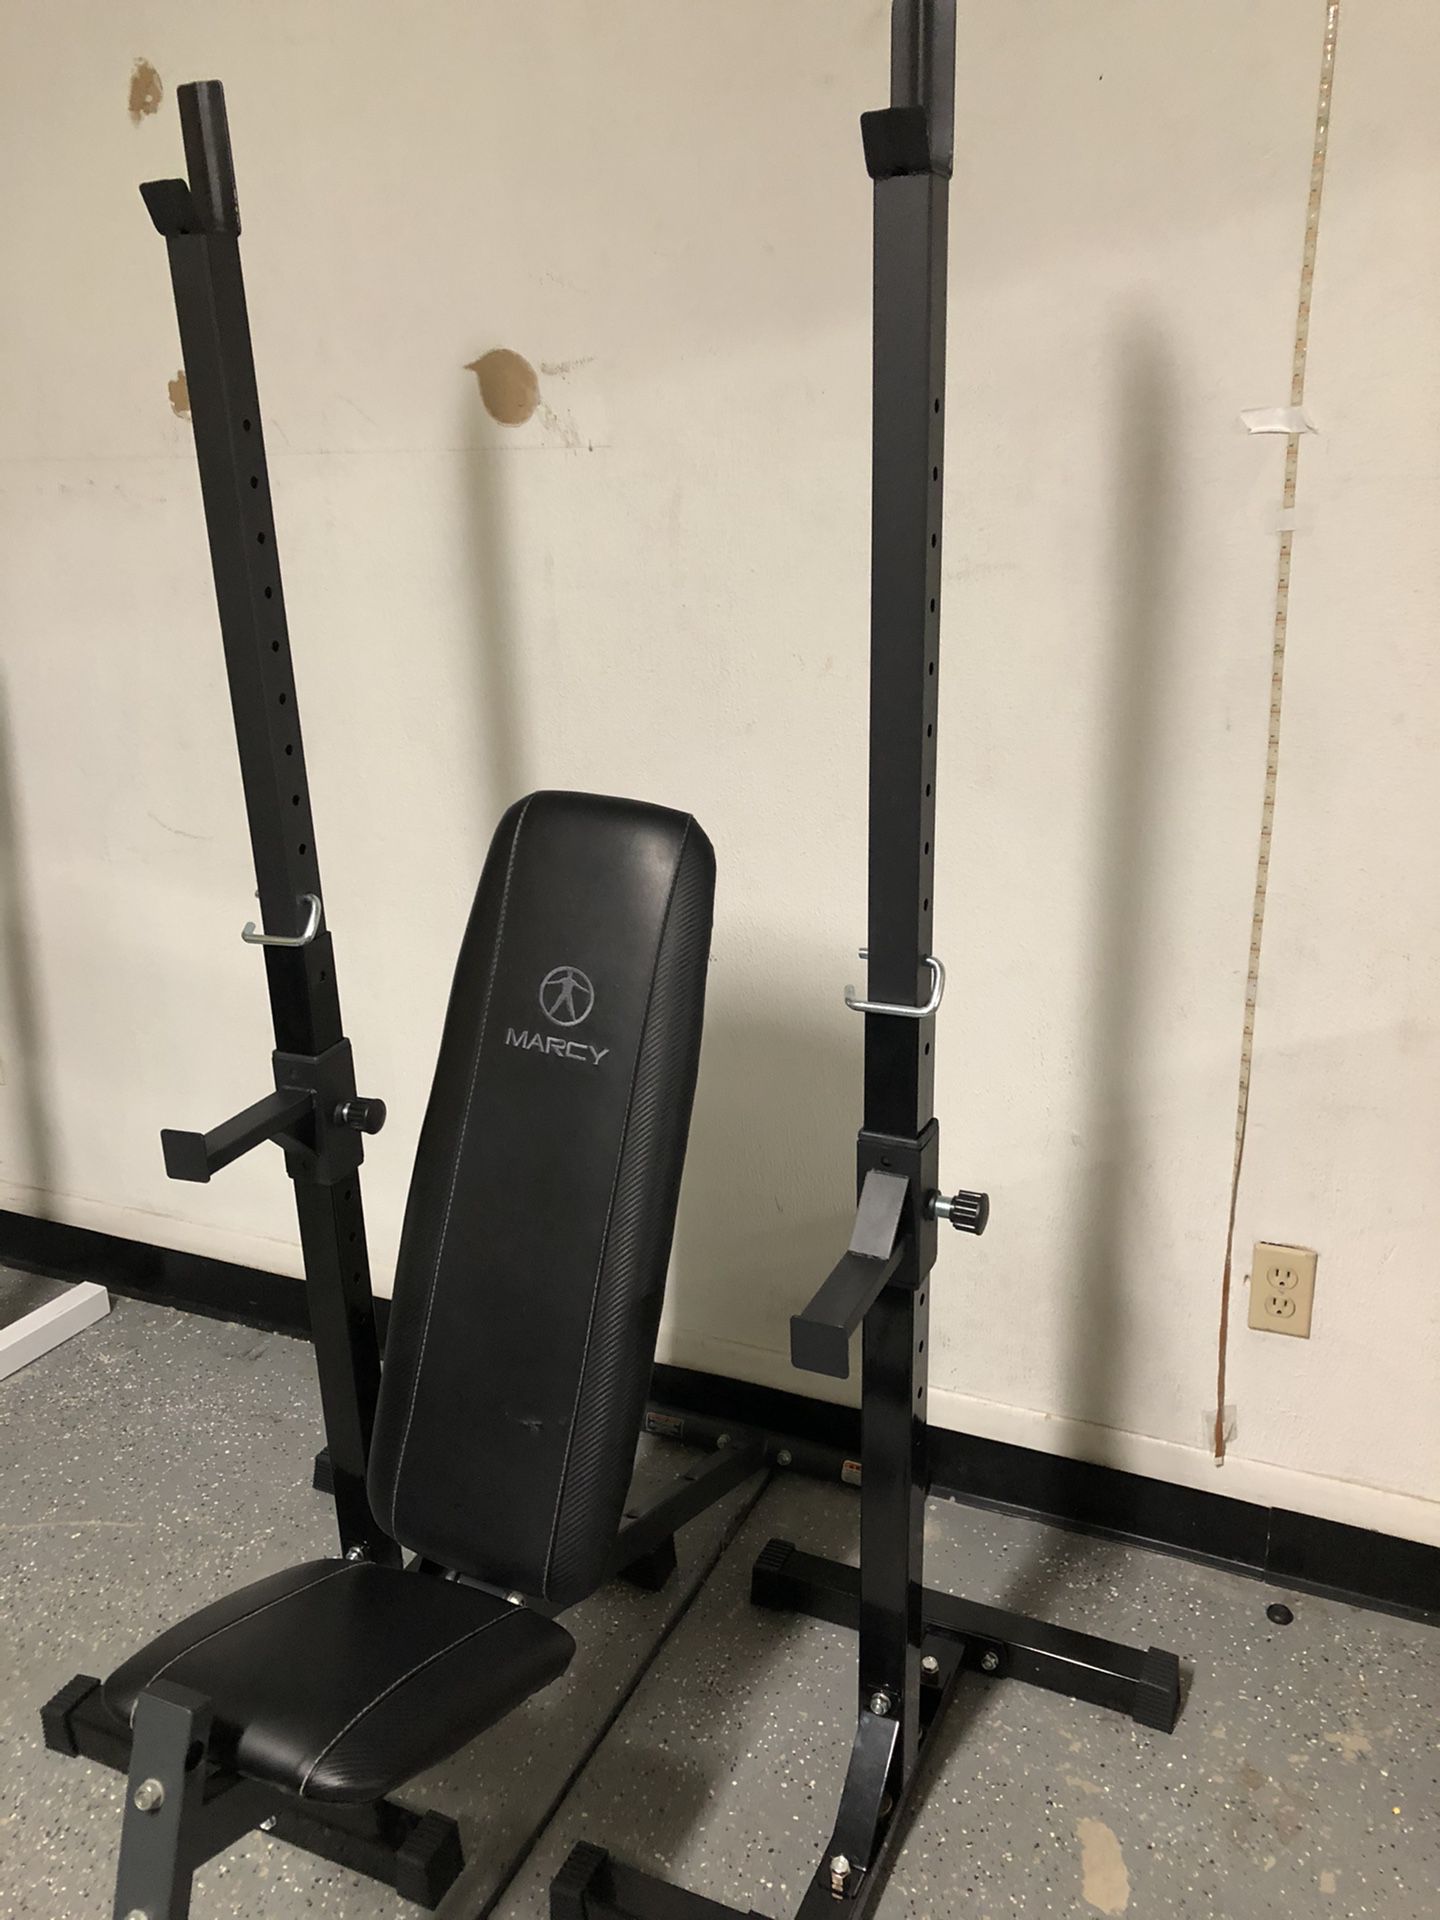 Light duty adjustable workout weight bench press and squat rack attachment...$150 OBO